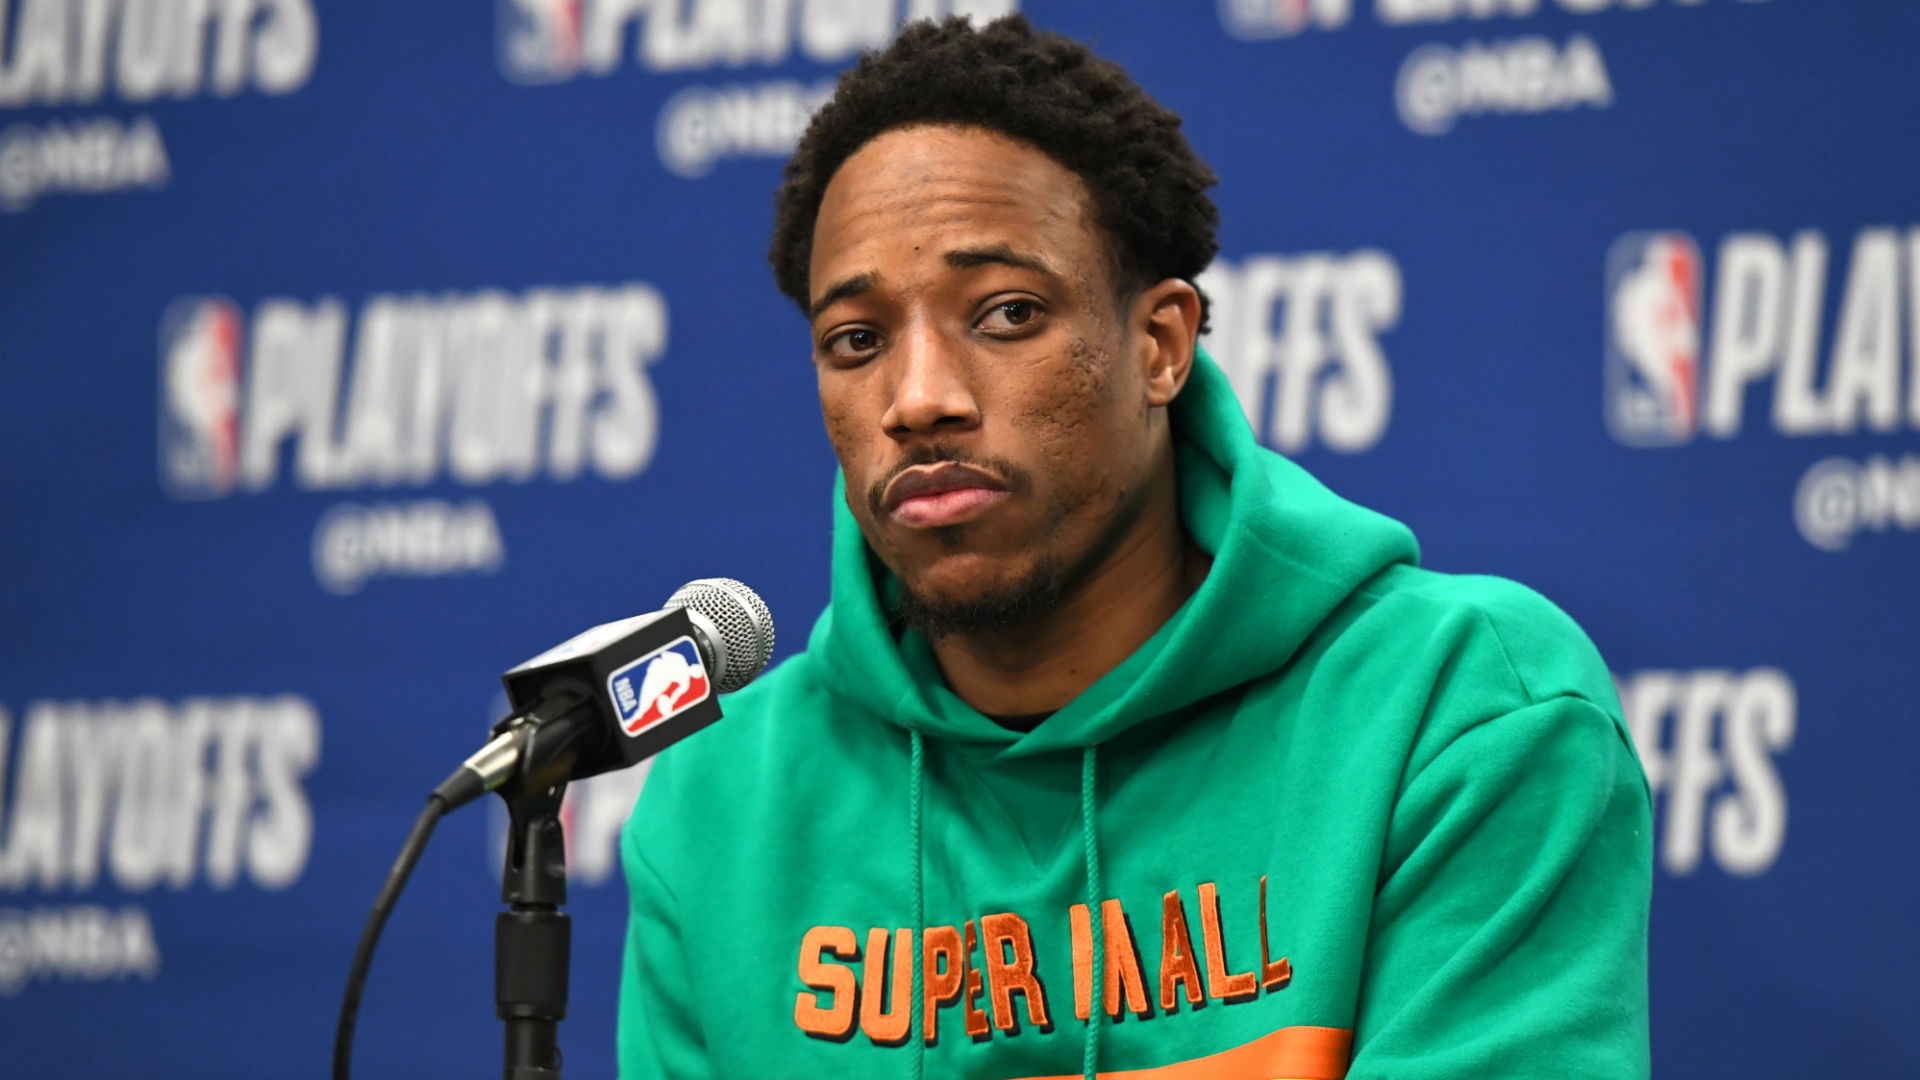 NBA Playoffs 2019: After Game 1 win, DeRozan insists Spurs 'can't lean' on having more ...1920 x 1080